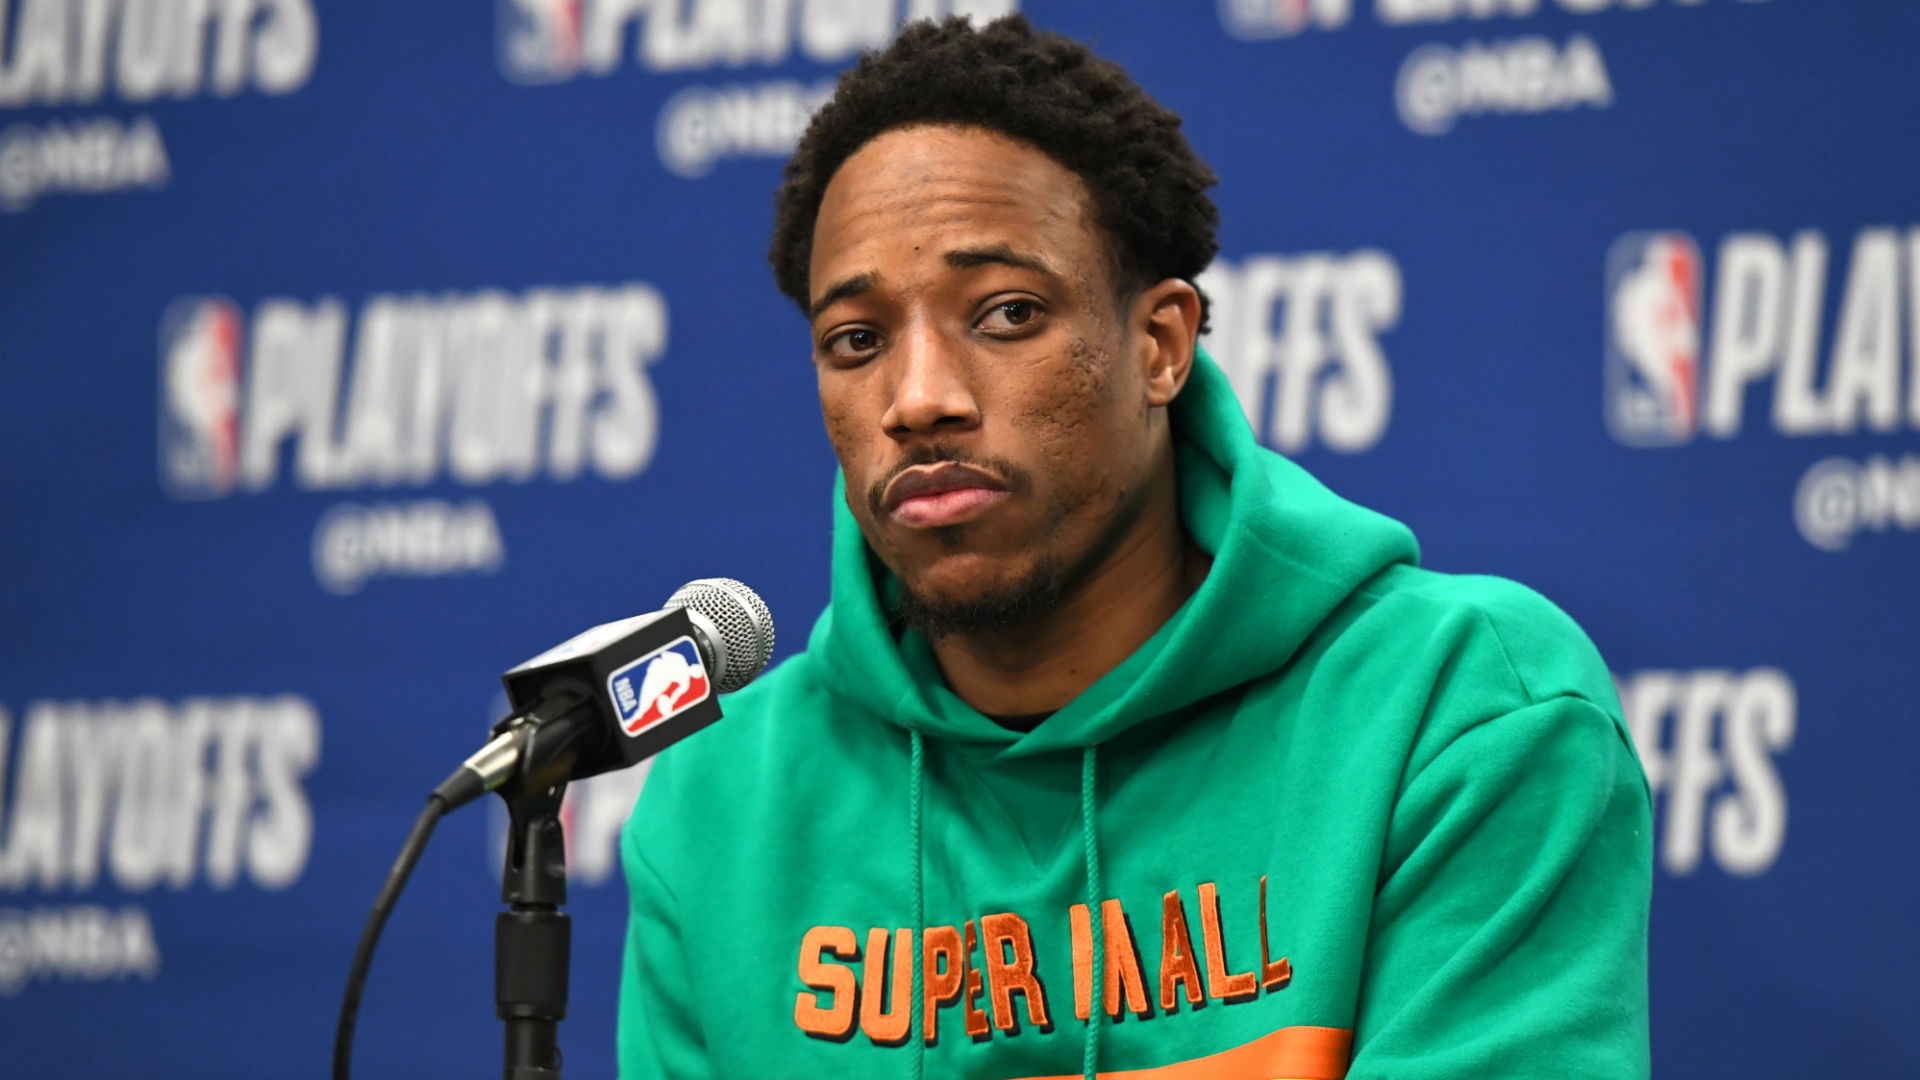 NBA Playoffs 2019: After Game 1 win, DeRozan insists Spurs 'can't lean' on having more ...1920 x 1080